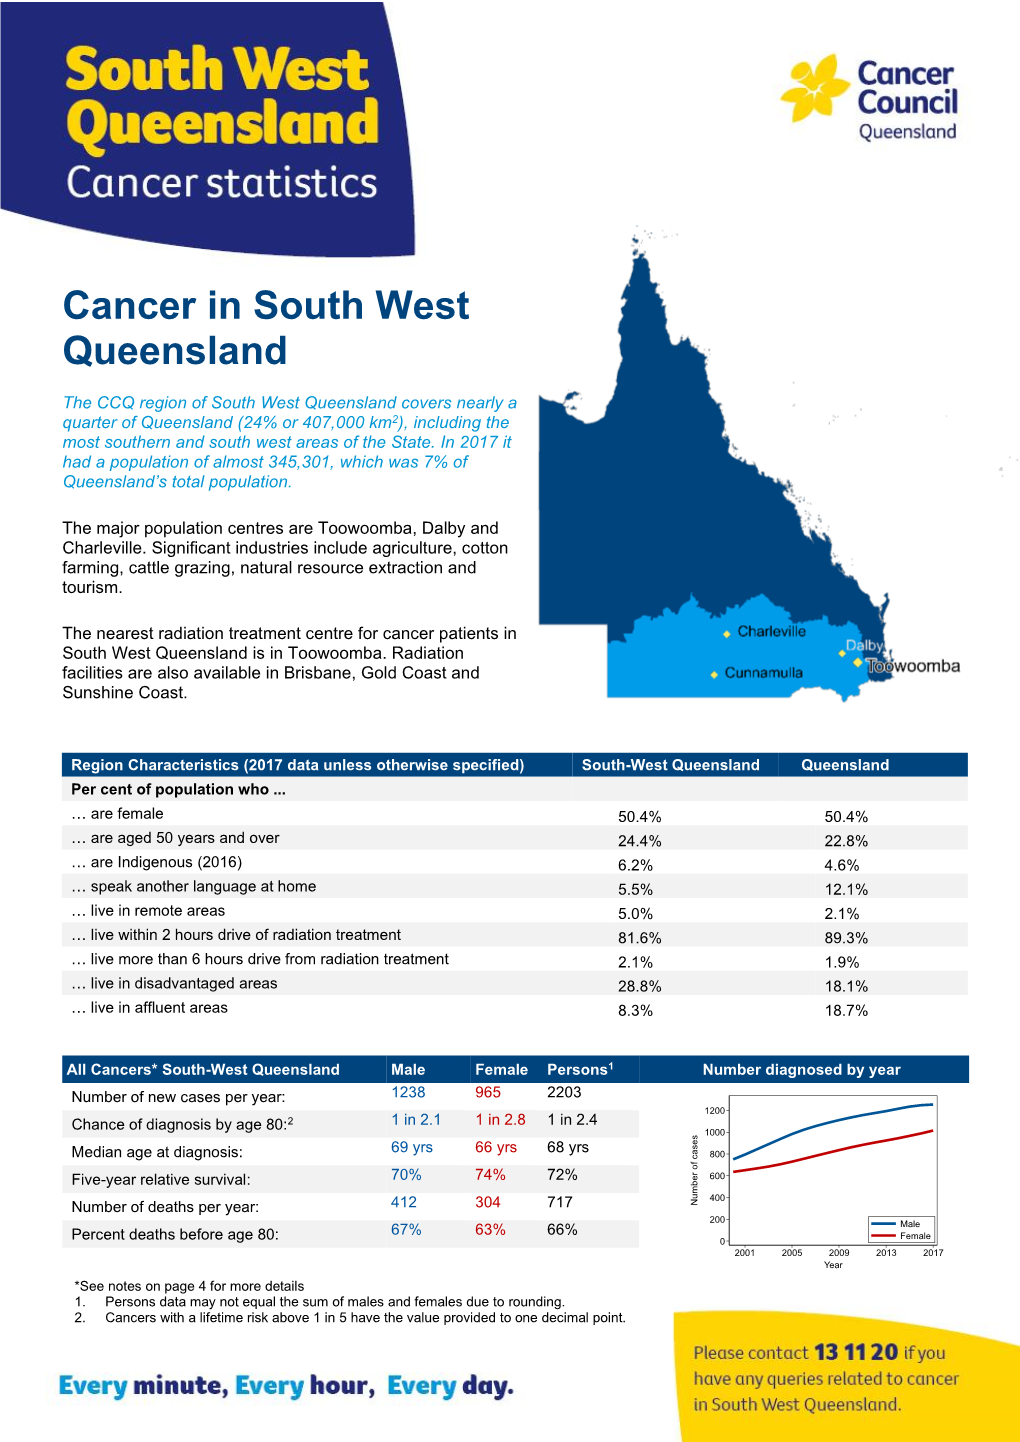 Cancer in South West Queensland